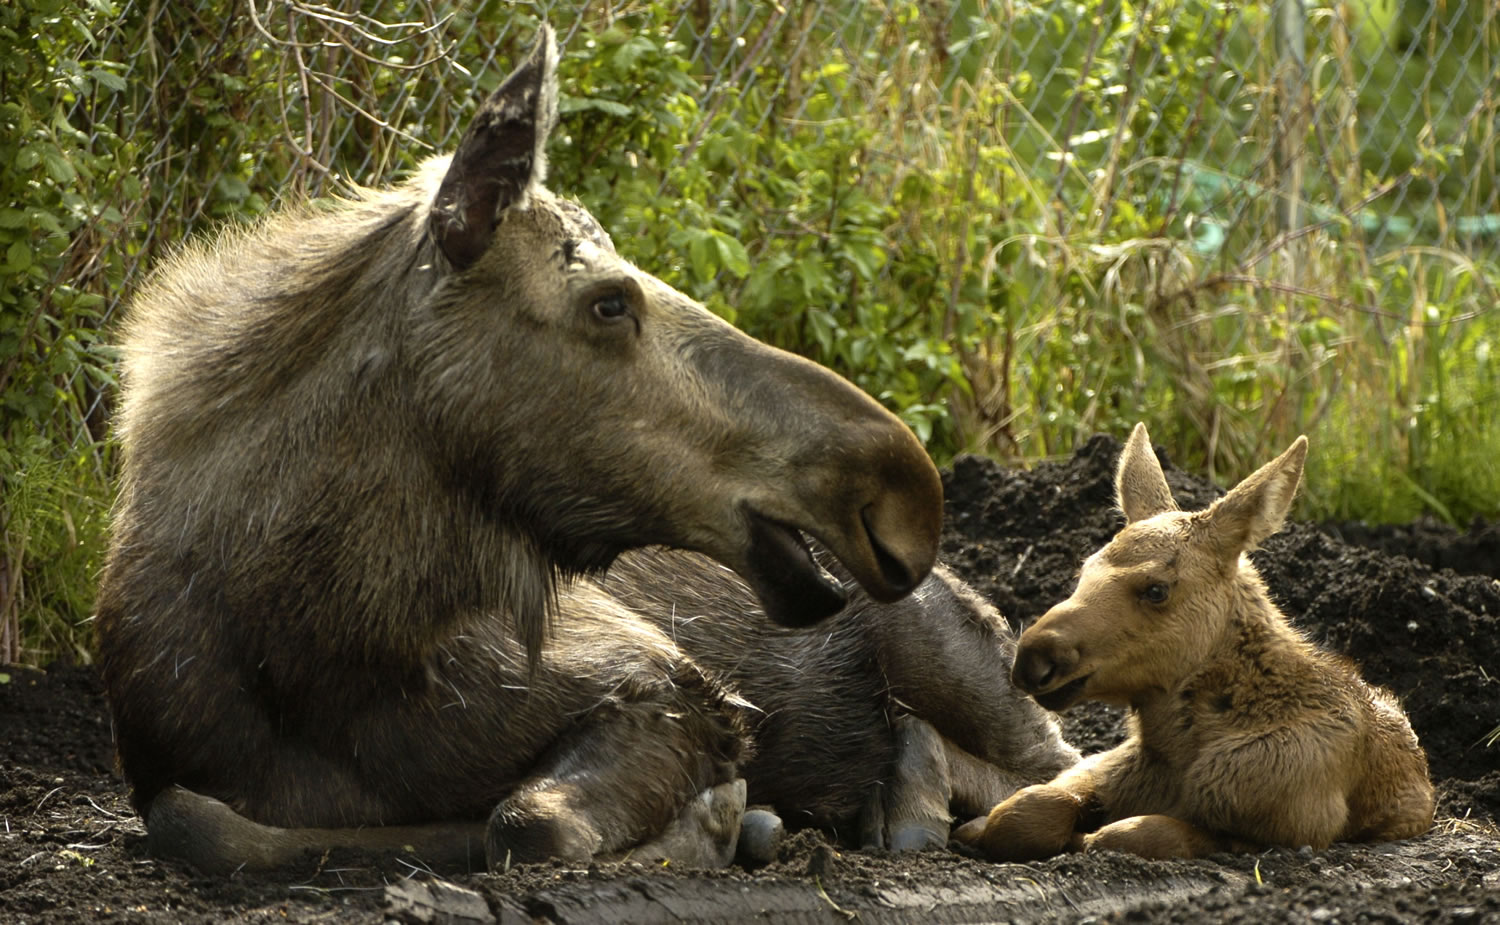 Bill Roth /Anchorage Daily News file
A baby moose rests with its mother north in Anchorage, Alaska. It's the time of year in Alaska when moose are being born, and state biologists once again are reminding people not to touch the calves.